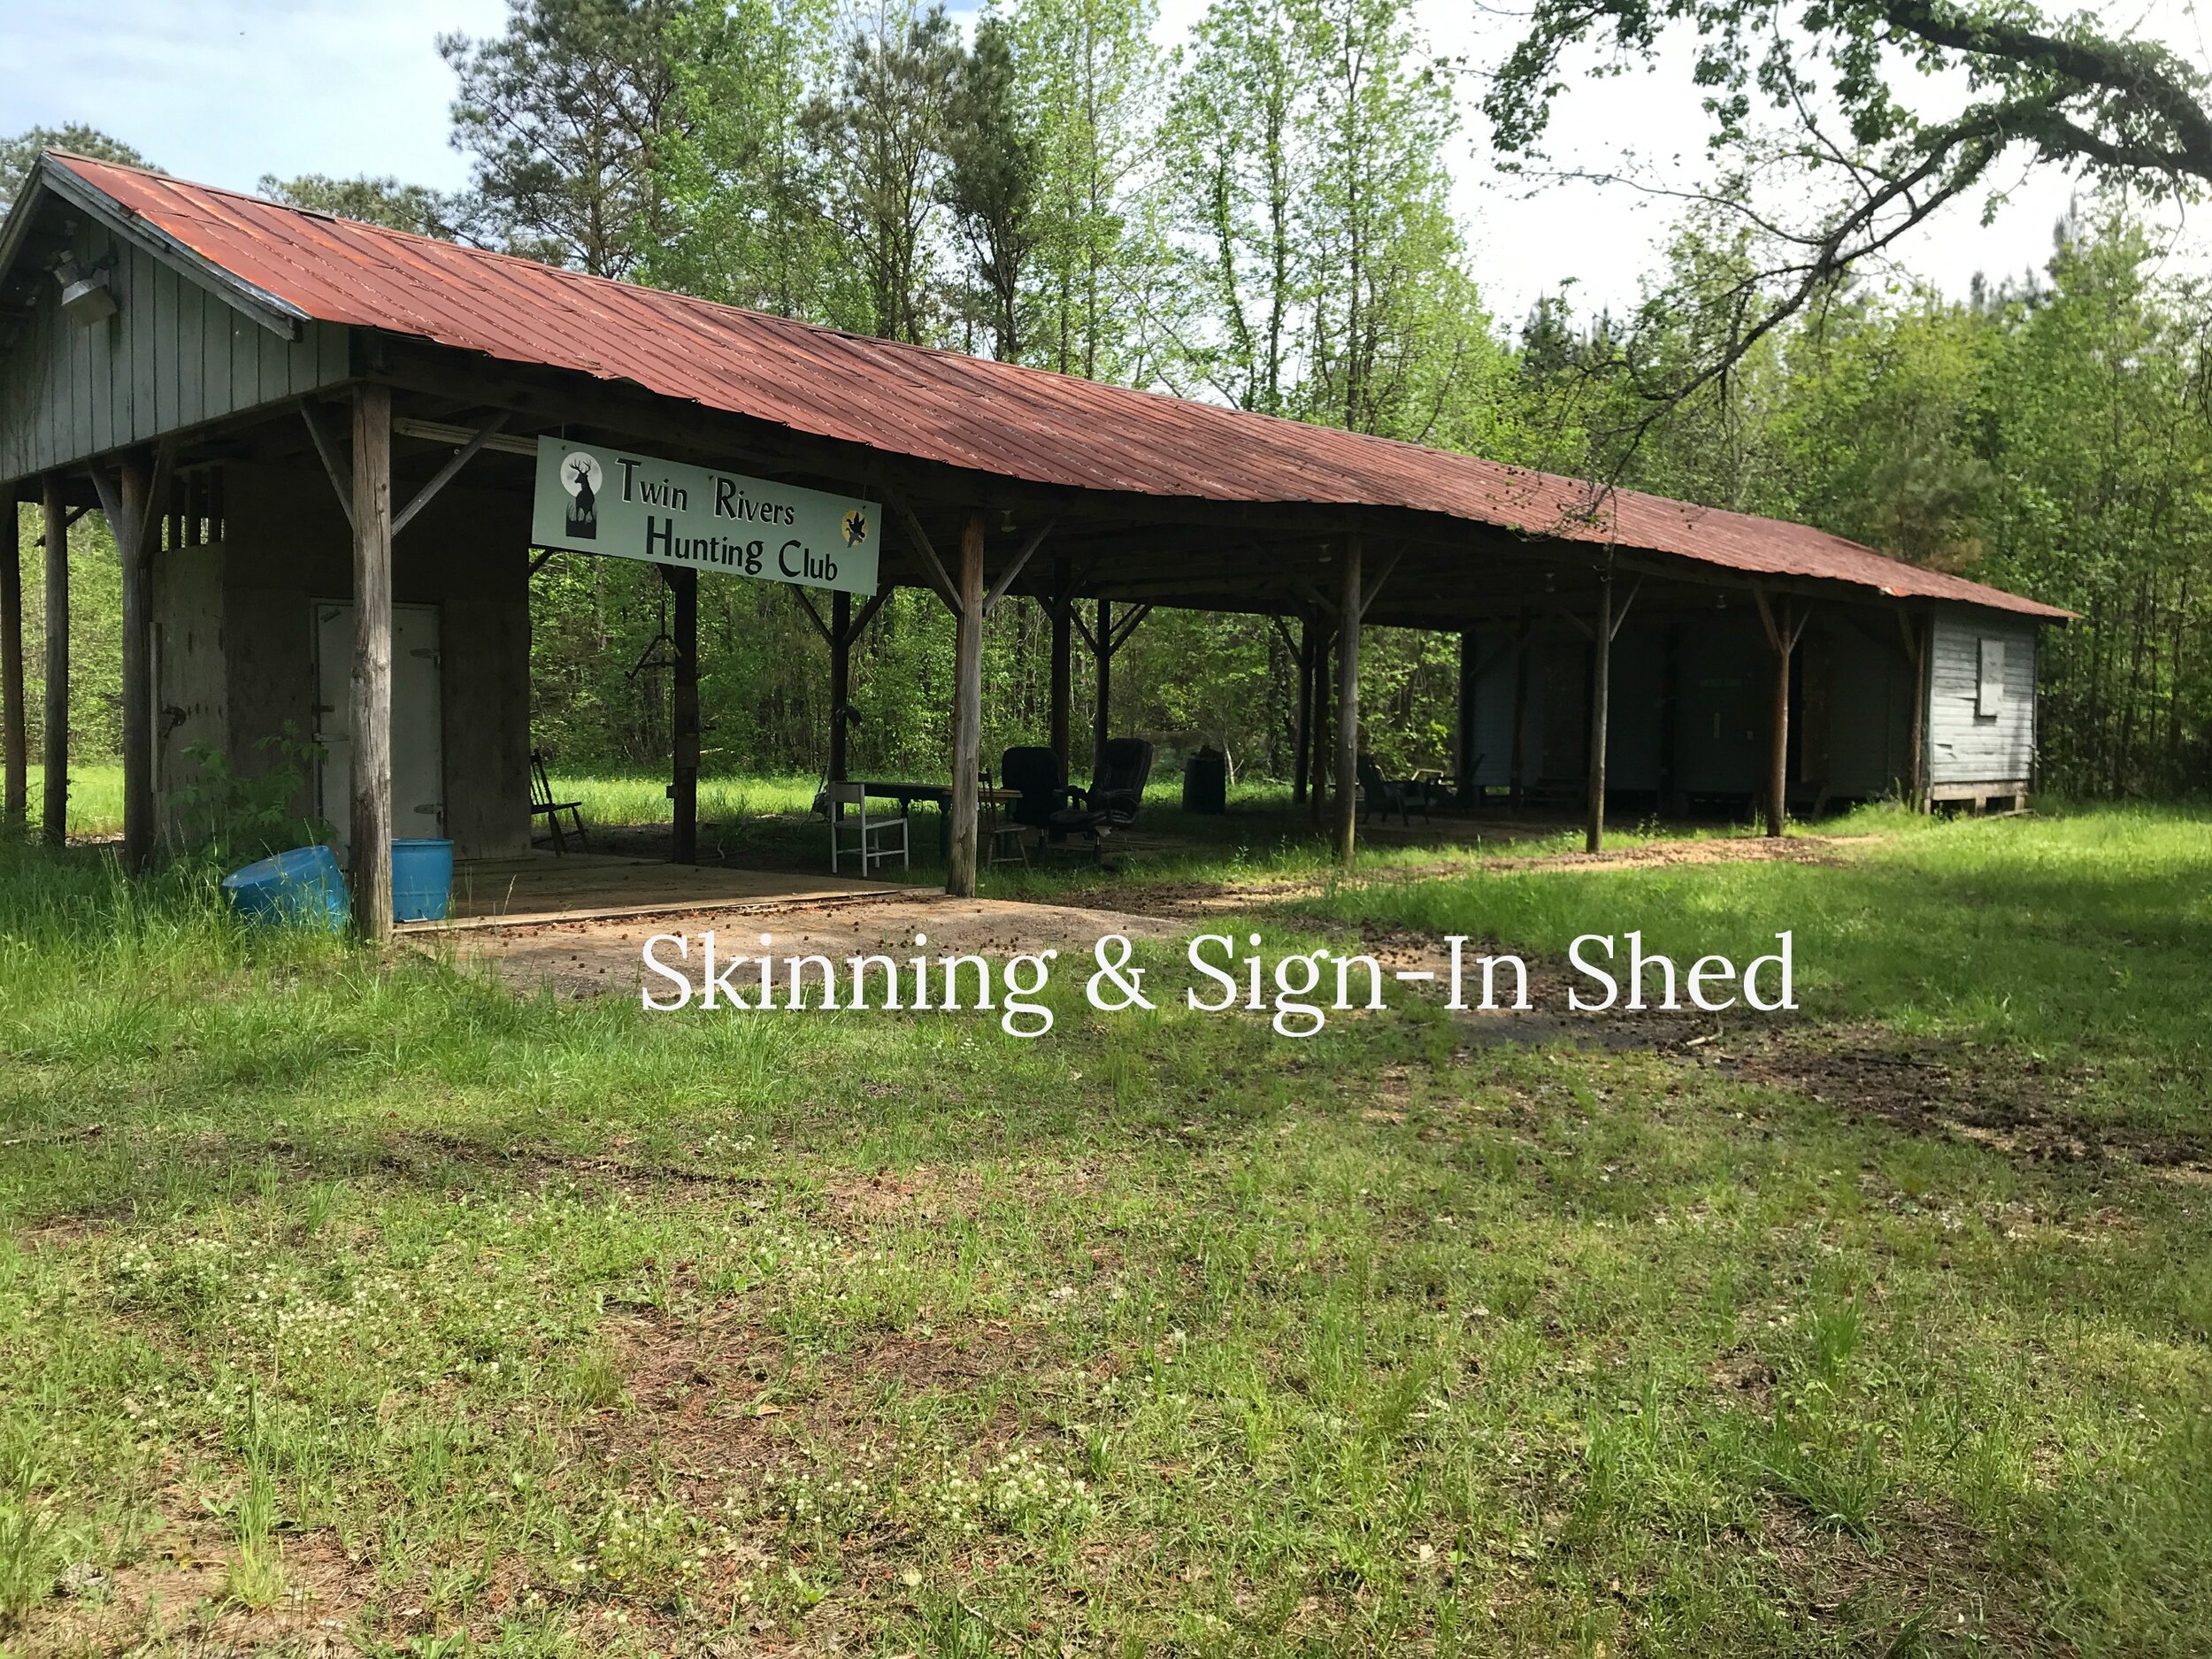 TR Skinning & Sign-In Shed_Text.jpg